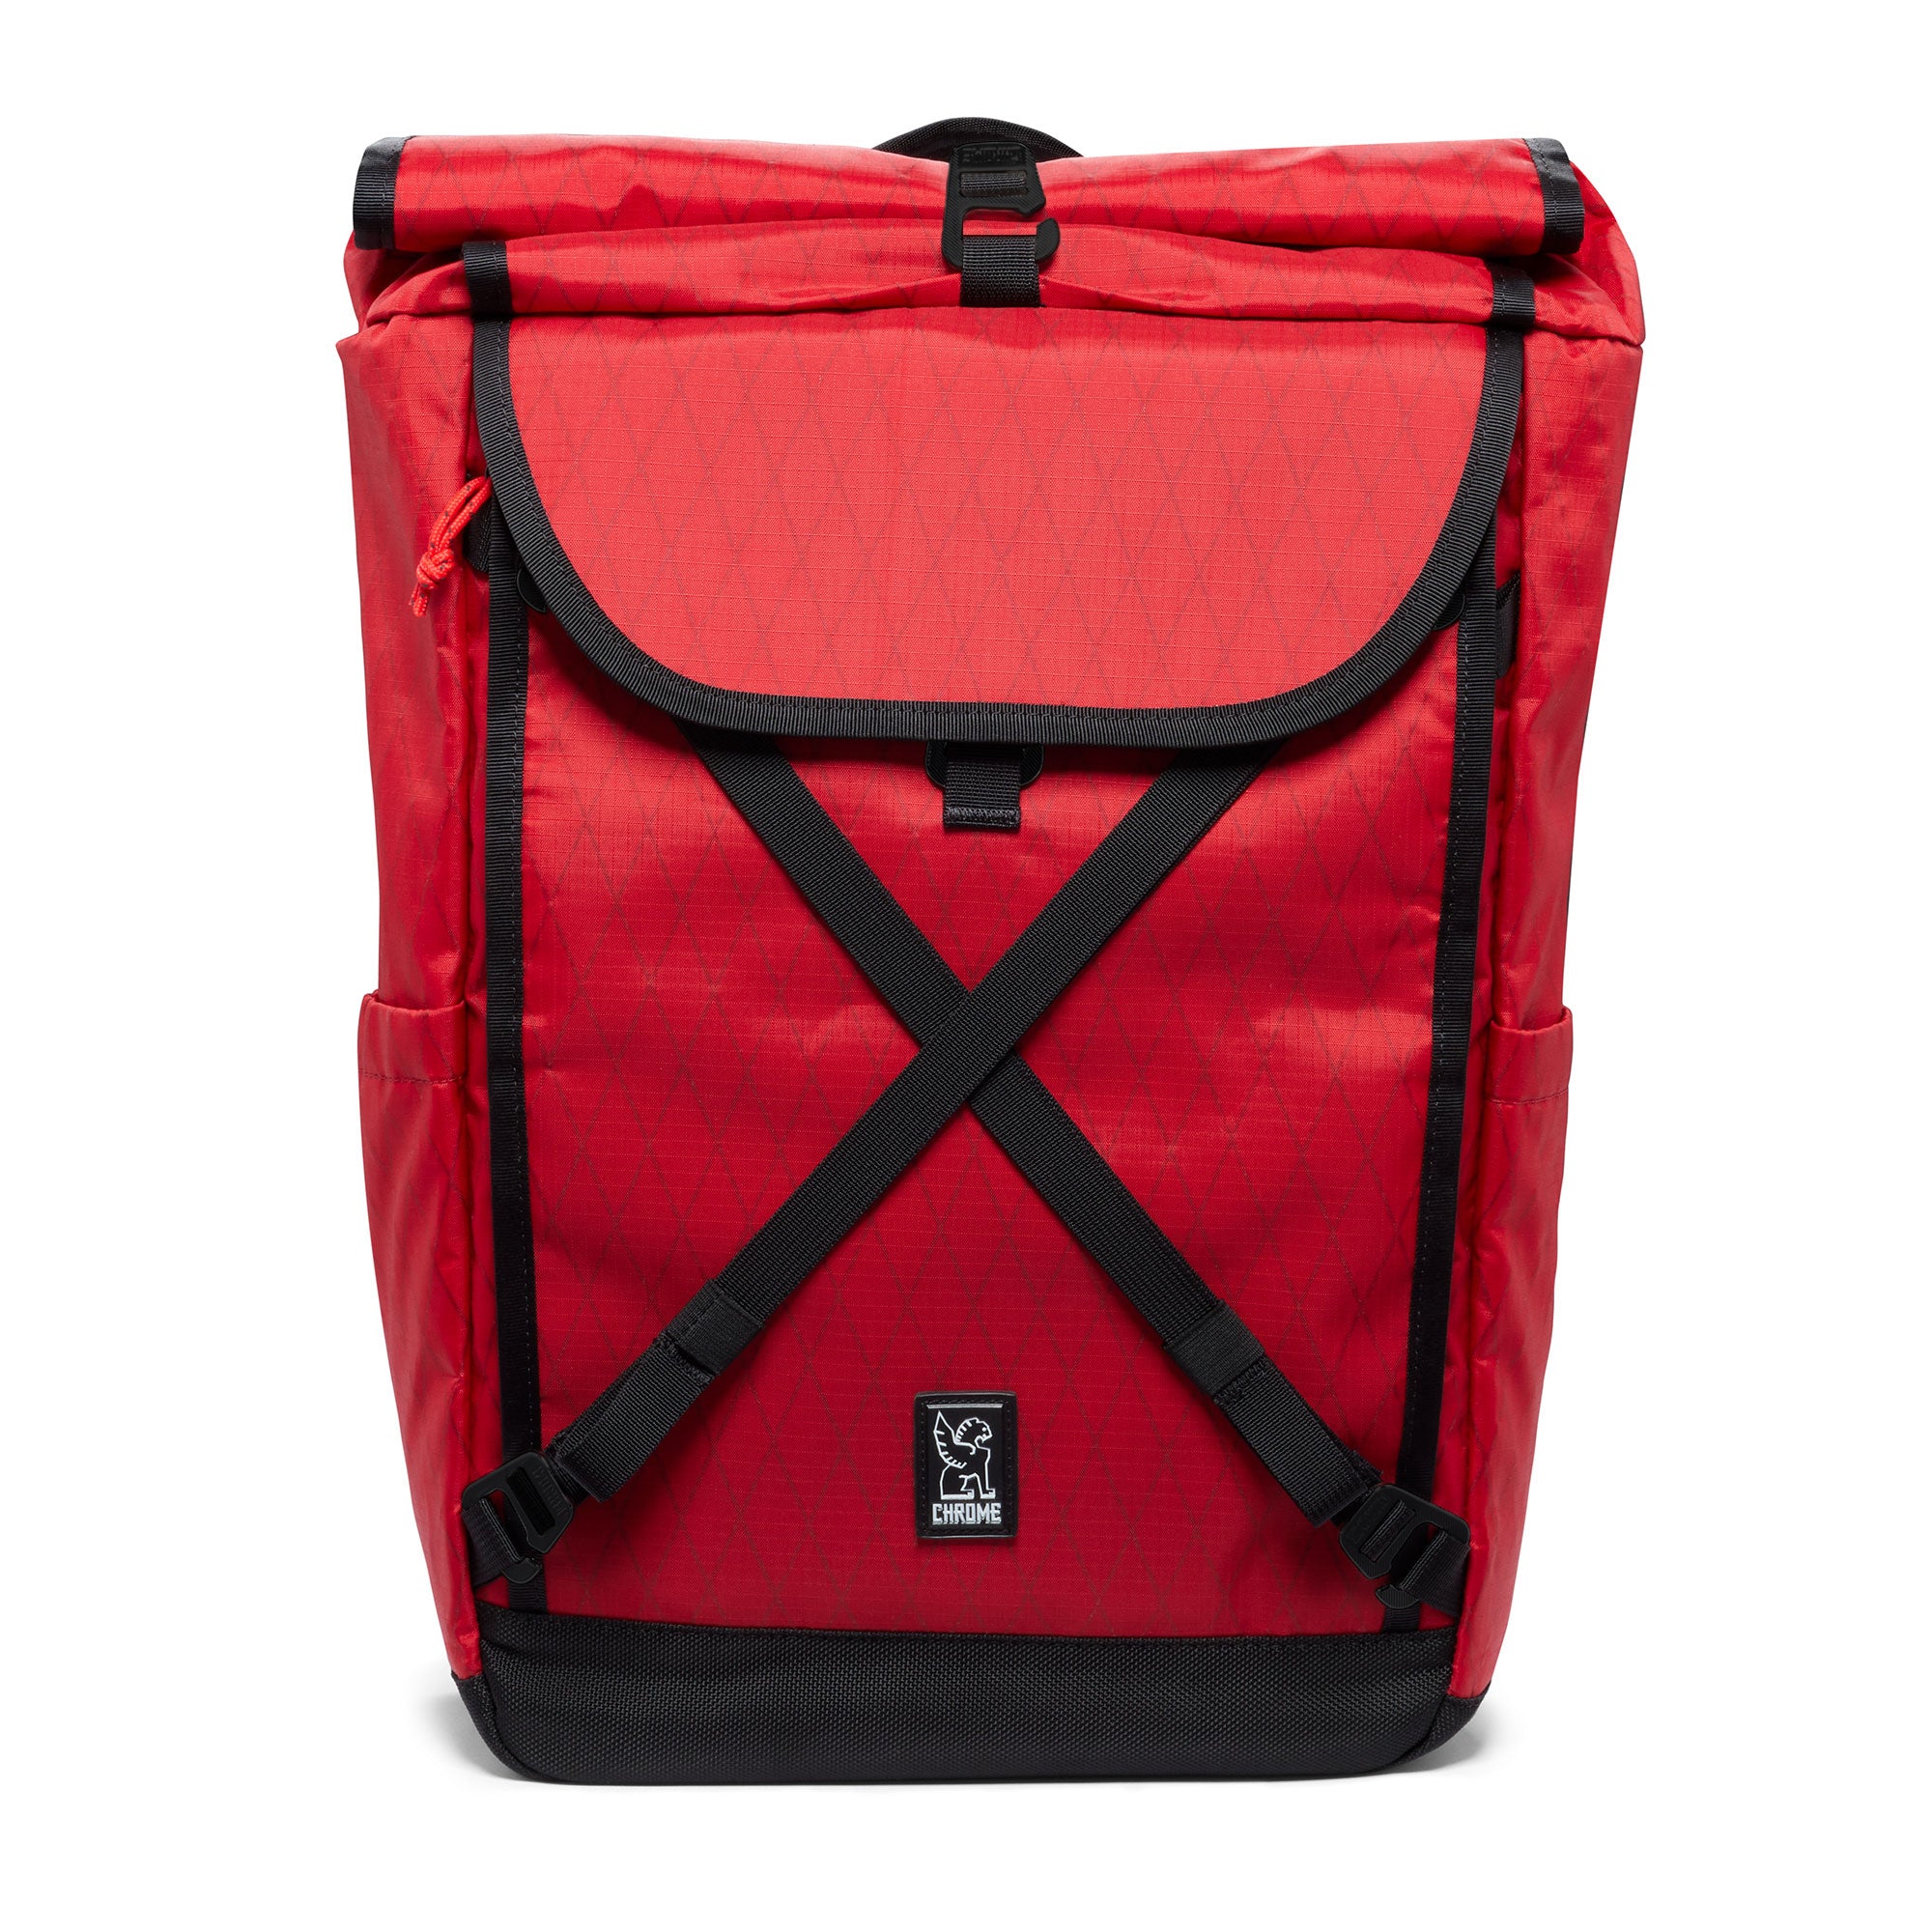 Bravo 4.0 backpack in red x fabric front view #color_red x